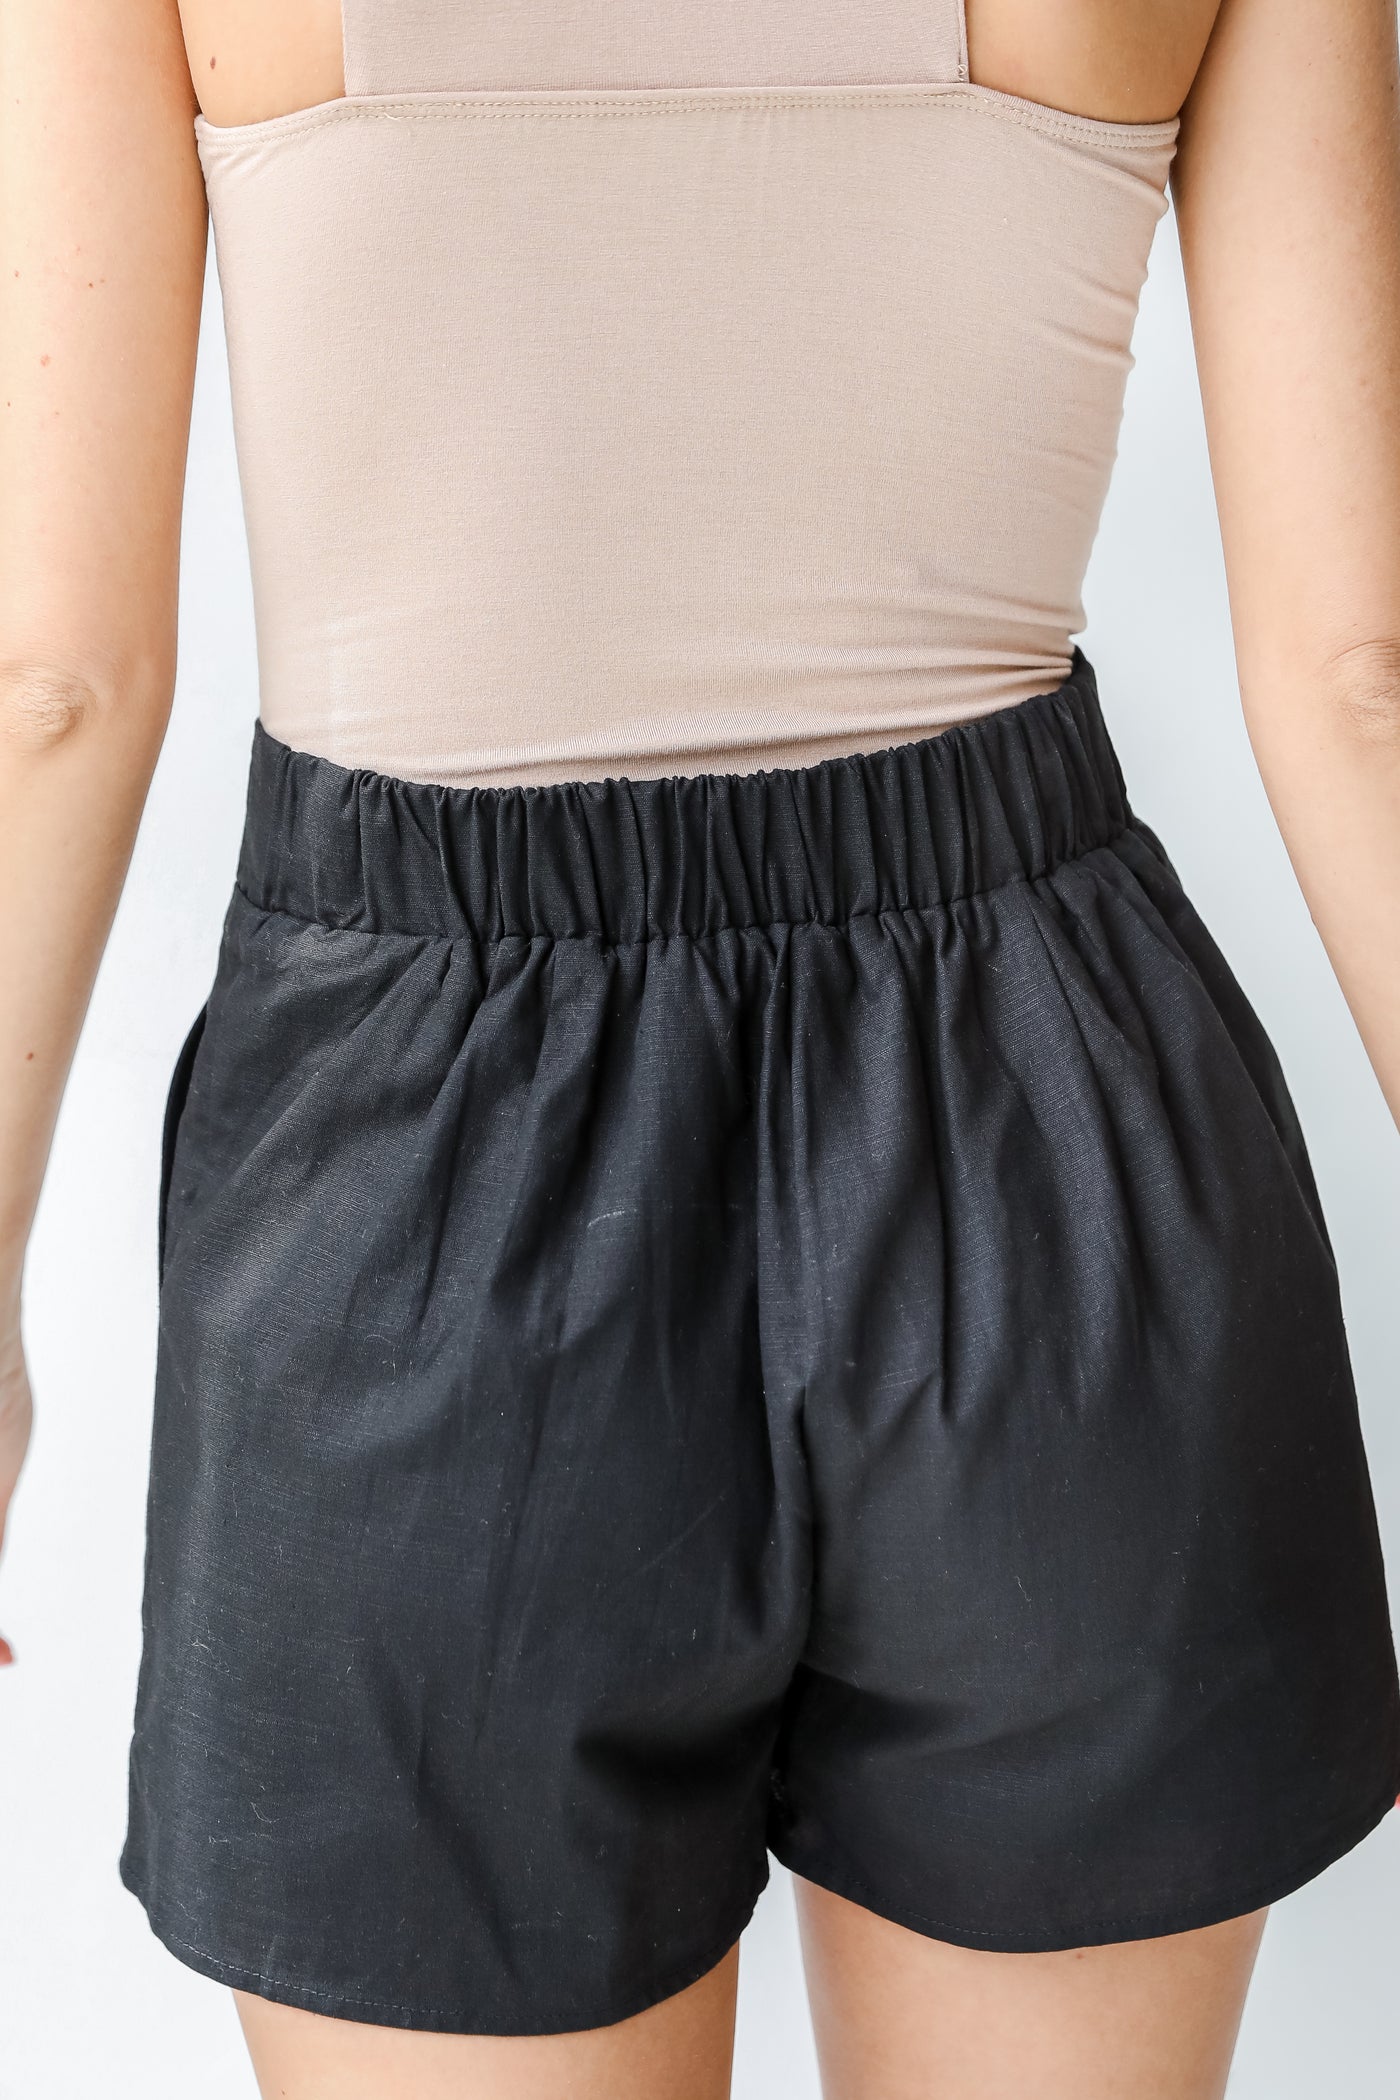 Linen Shorts in black back view